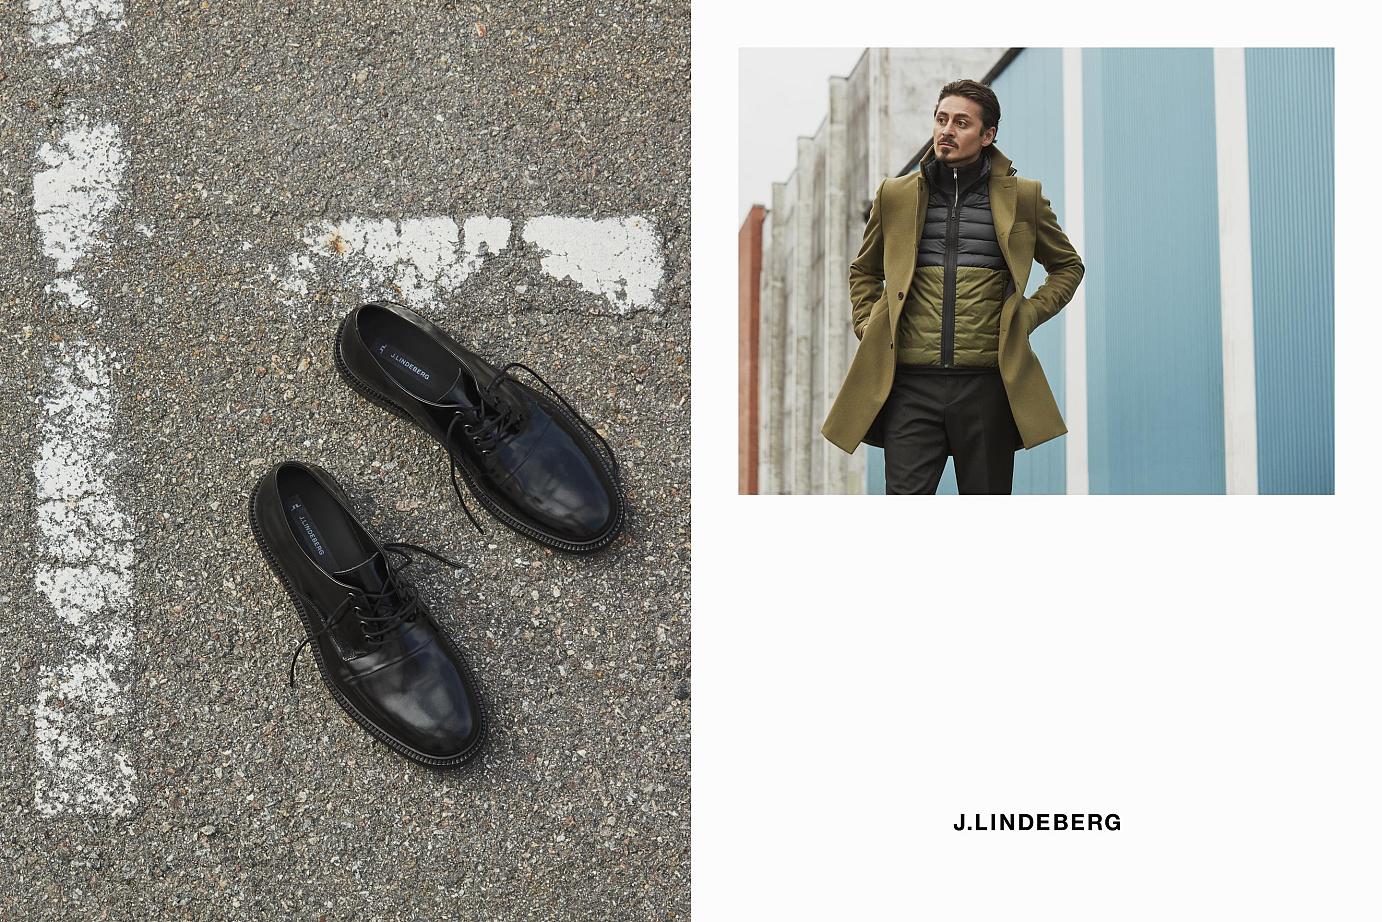 CoqCreative power by ProductionLink s.r.l. J-Lindeberg-FW2020 J-Lindeberg-FW2020  J-Lindeberg-FW2020